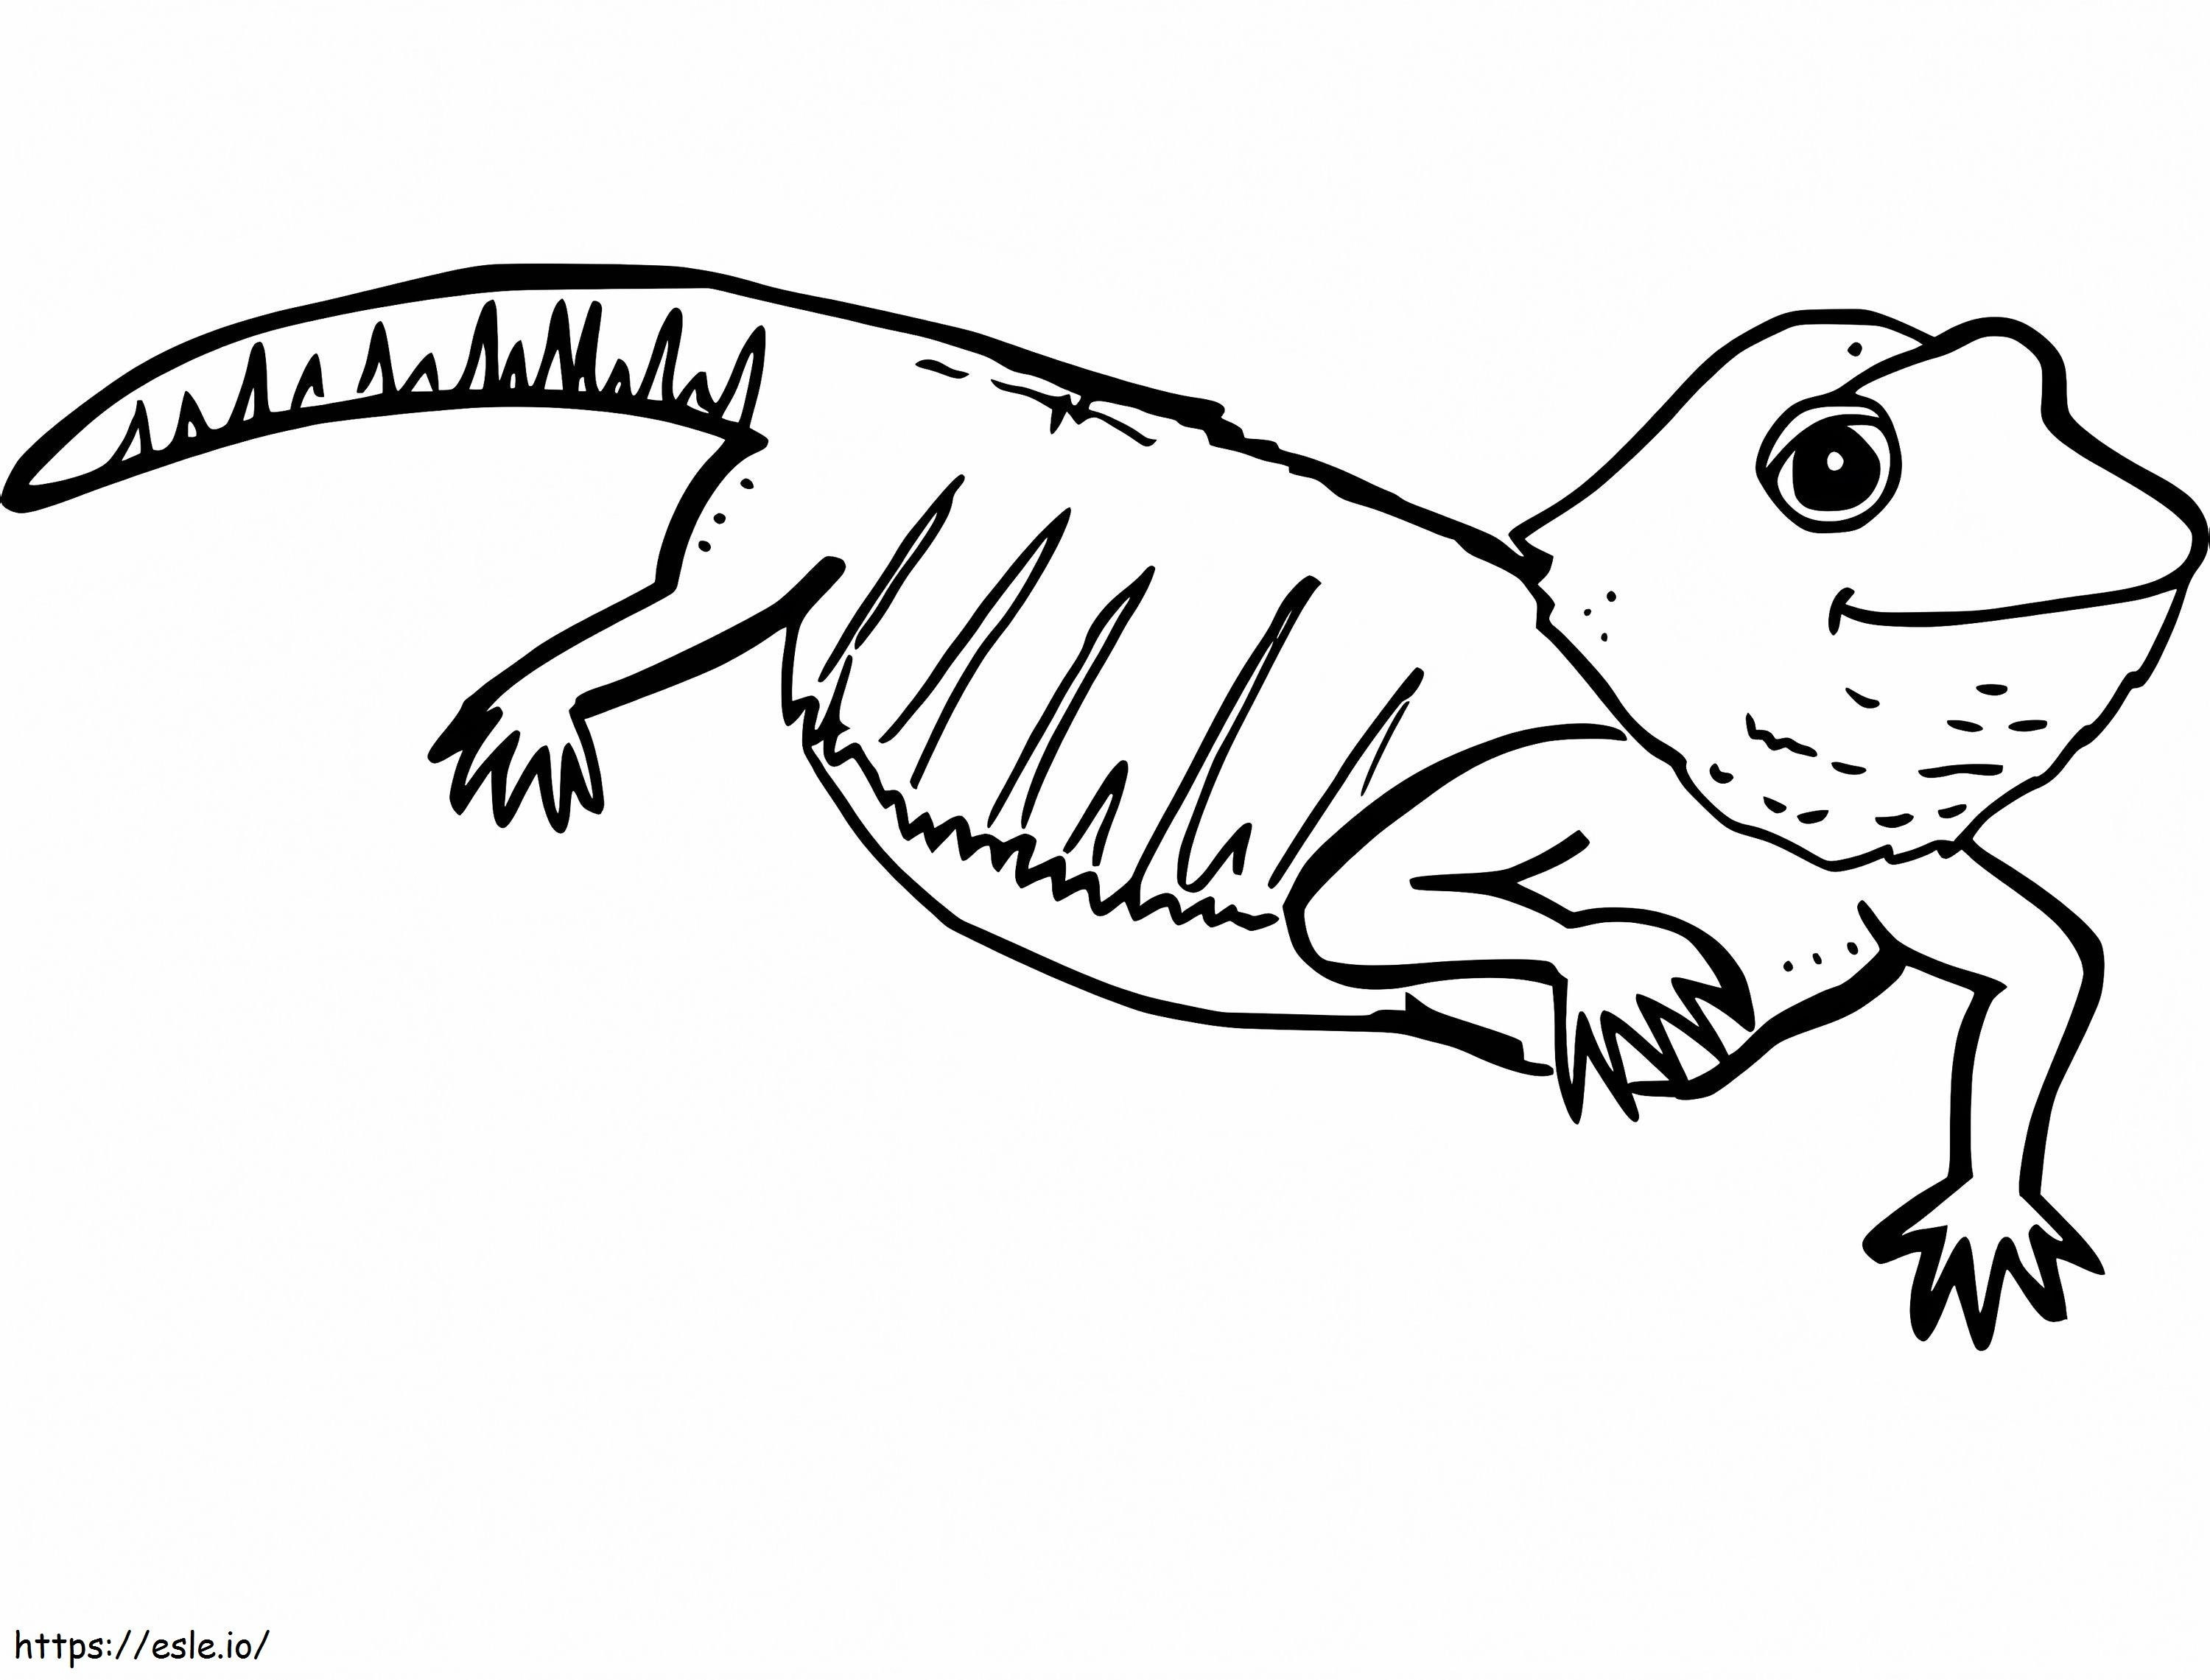 Cute Bearded Dragon coloring page